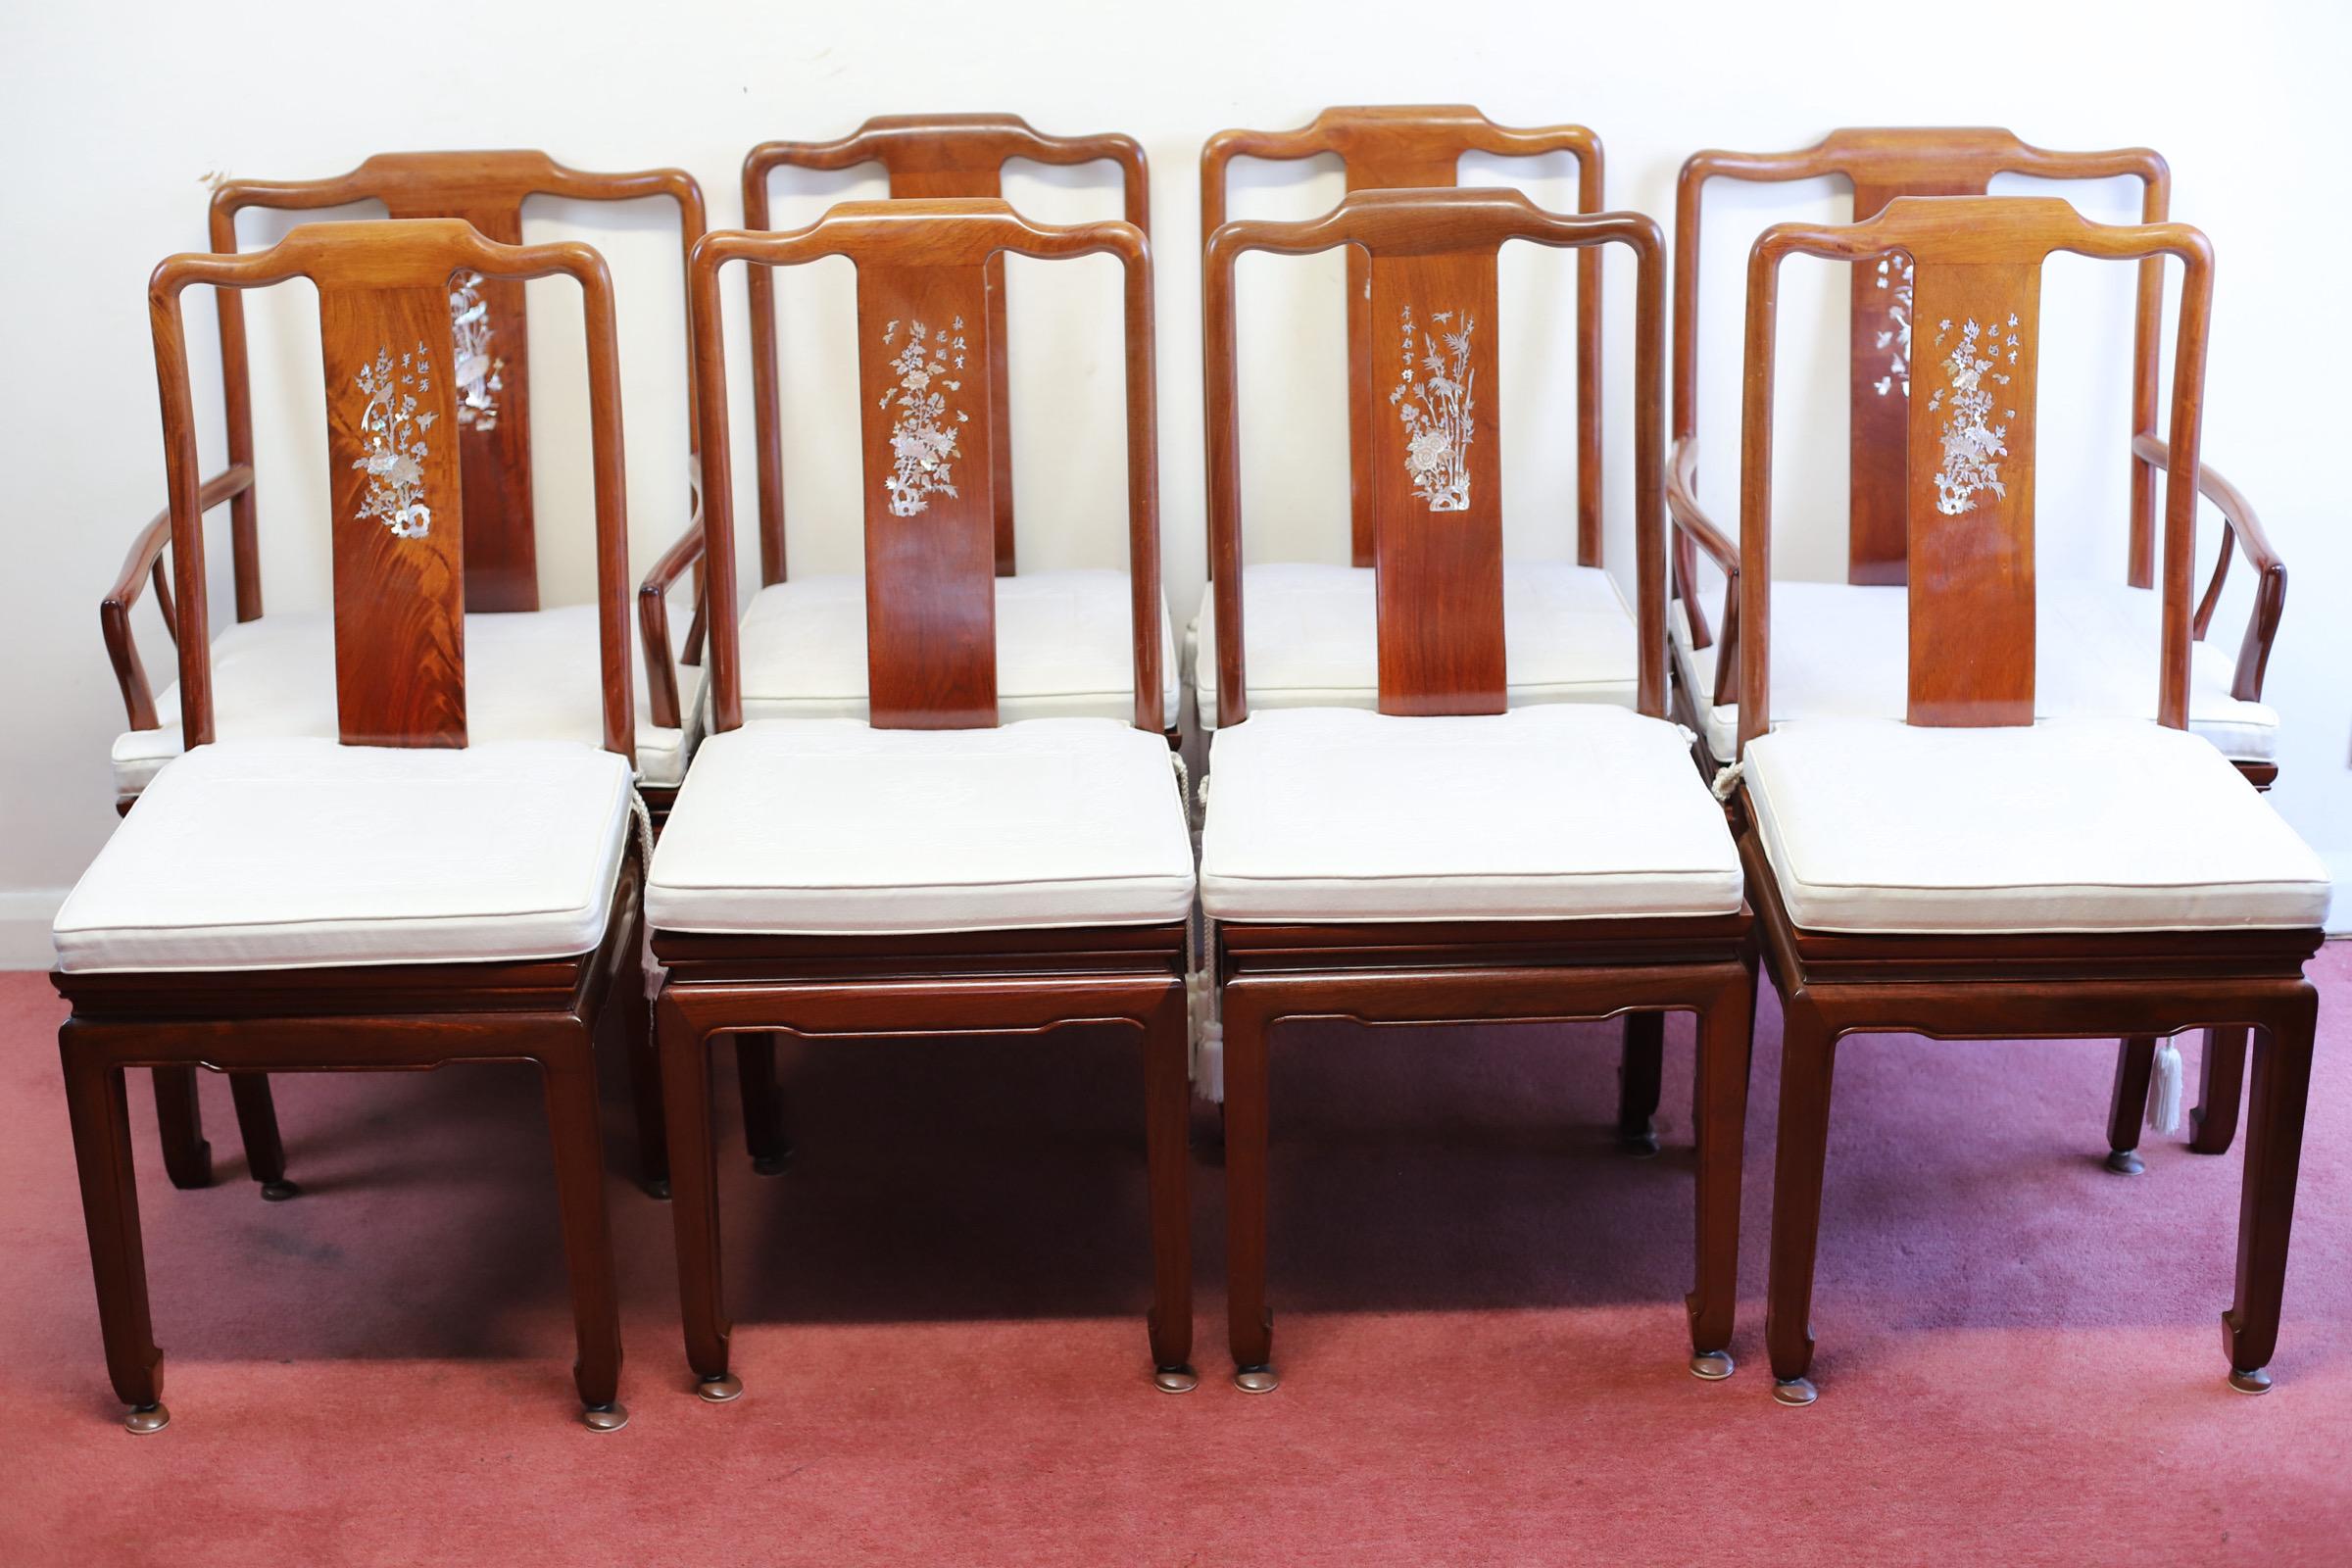 20th Century Stunning Asian Hardwood And Mother-of-pearl Inset Dining Table And Eight Chairs For Sale